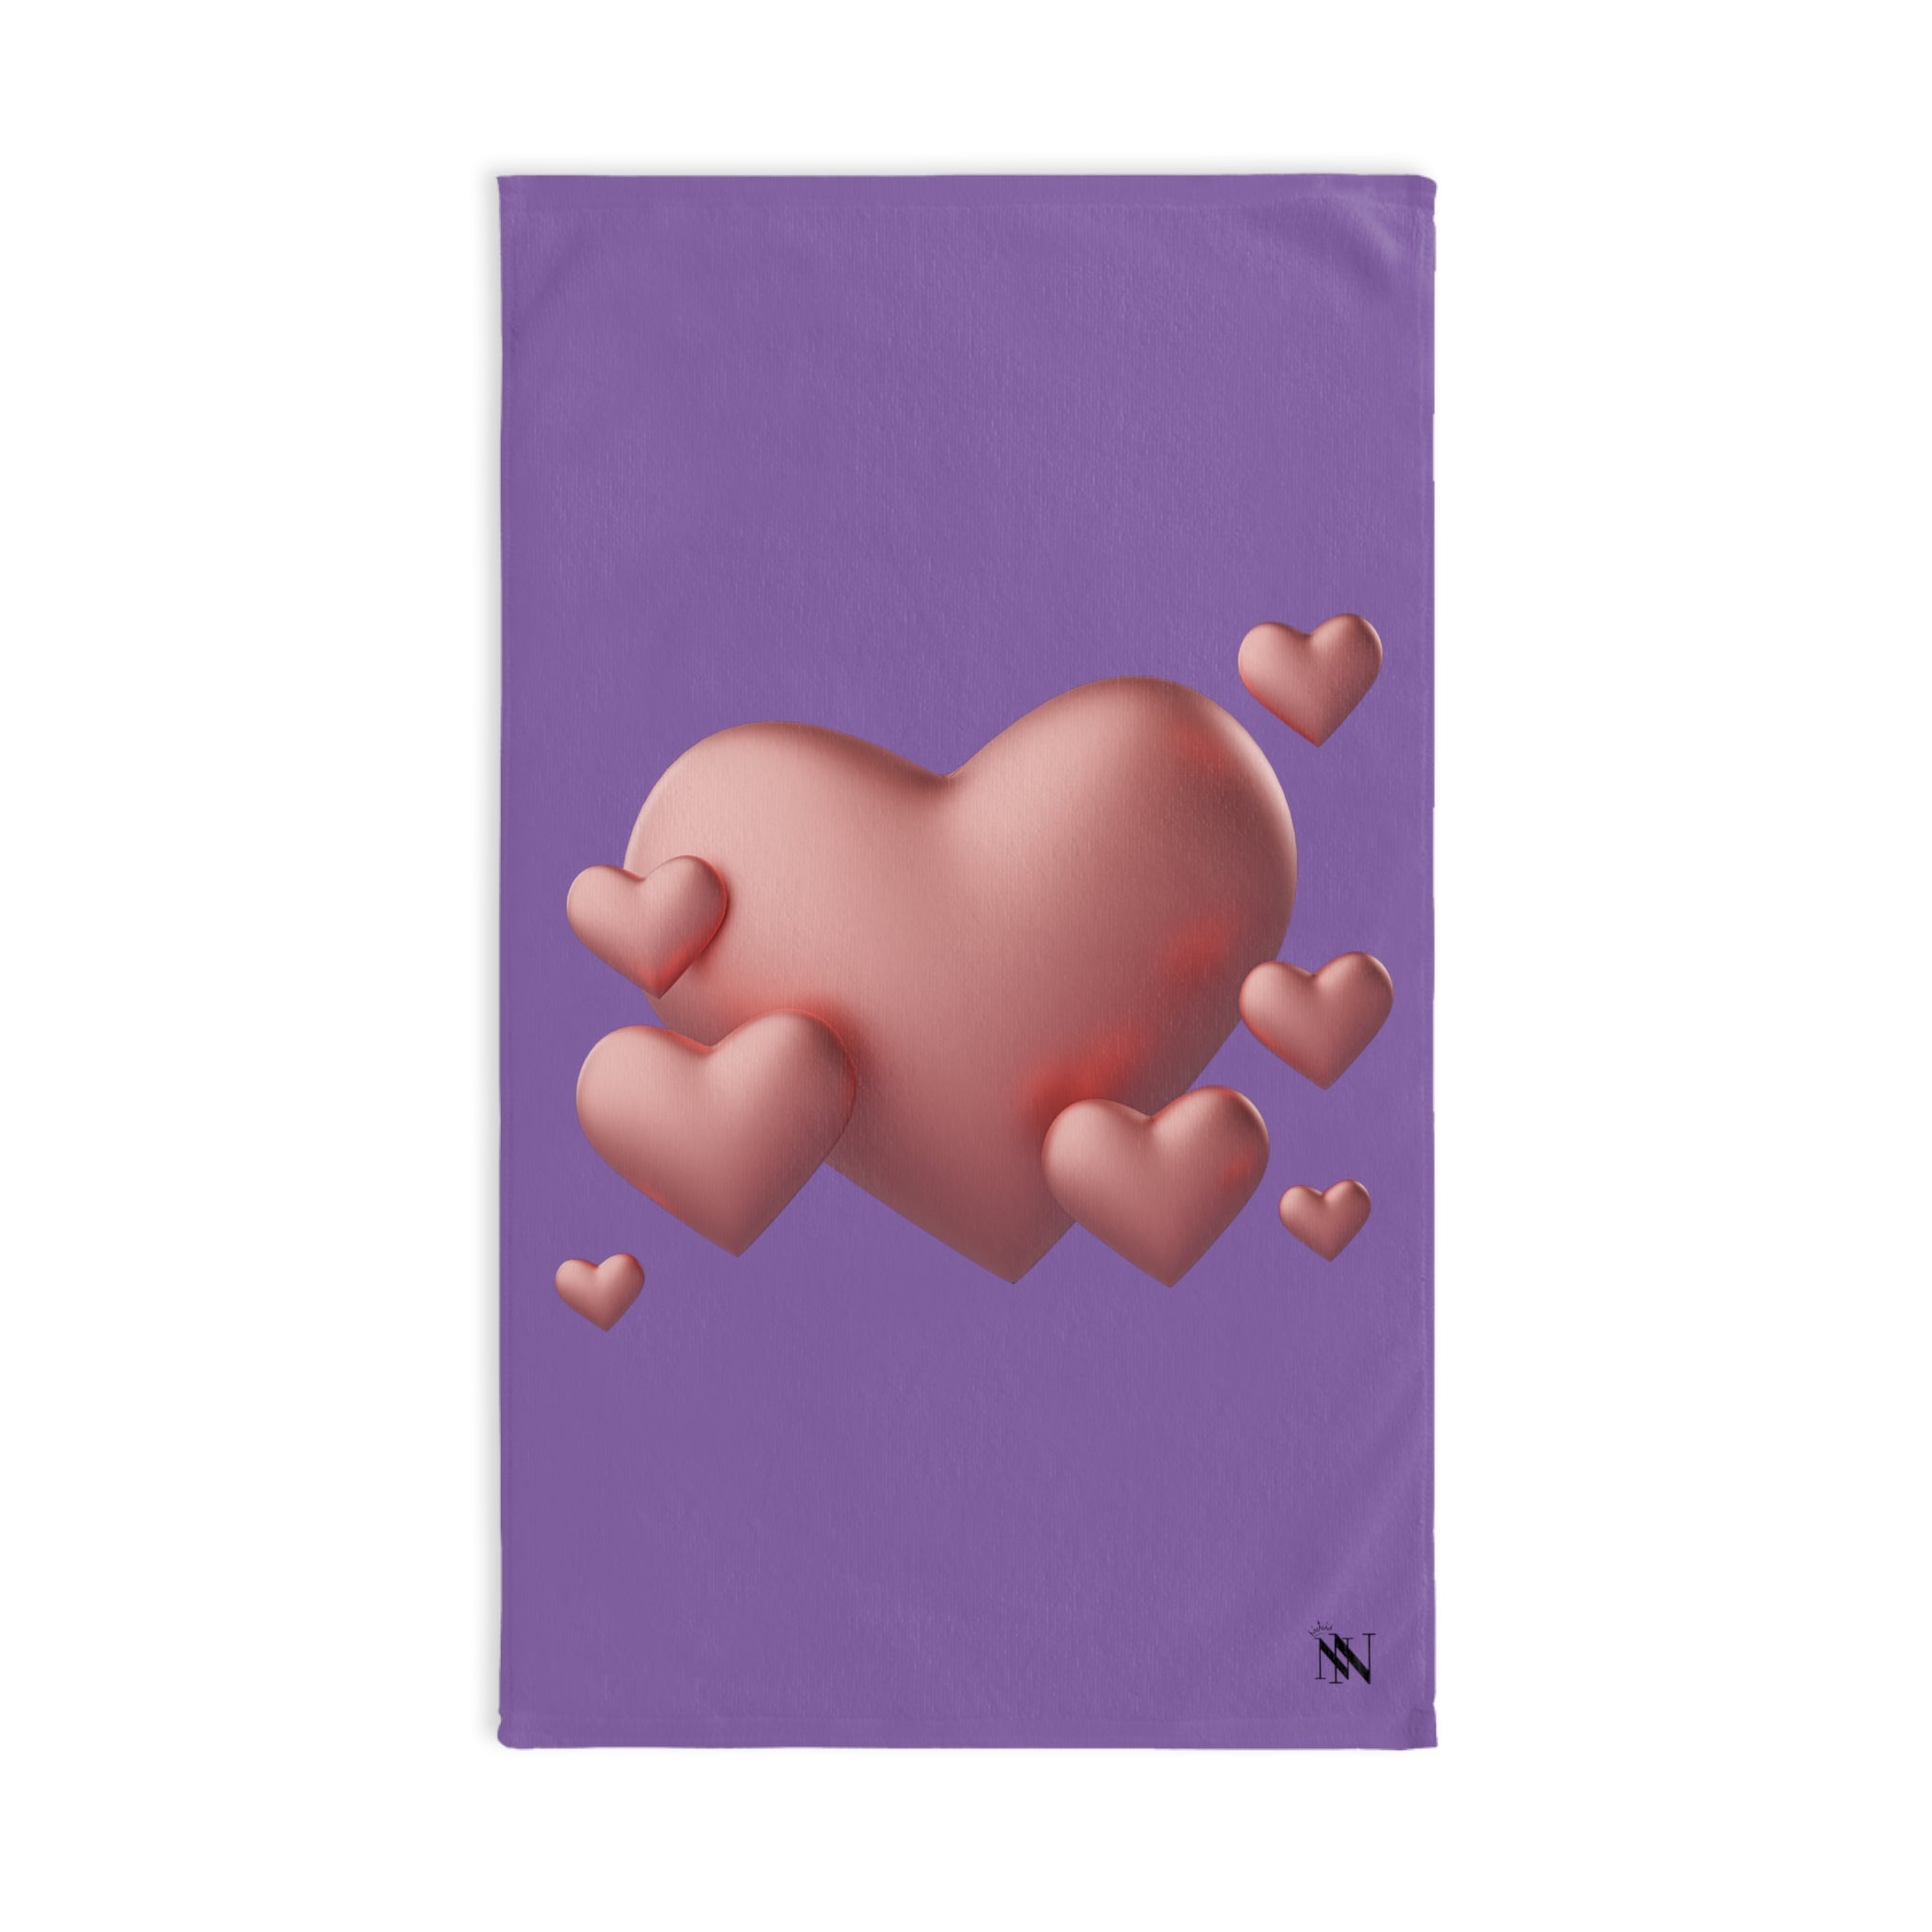 Puff Pink Heart 3D Lavendar | Funny Gifts for Men - Gifts for Him - Birthday Gifts for Men, Him, Husband, Boyfriend, New Couple Gifts, Fathers & Valentines Day Gifts, Hand Towels NECTAR NAPKINS